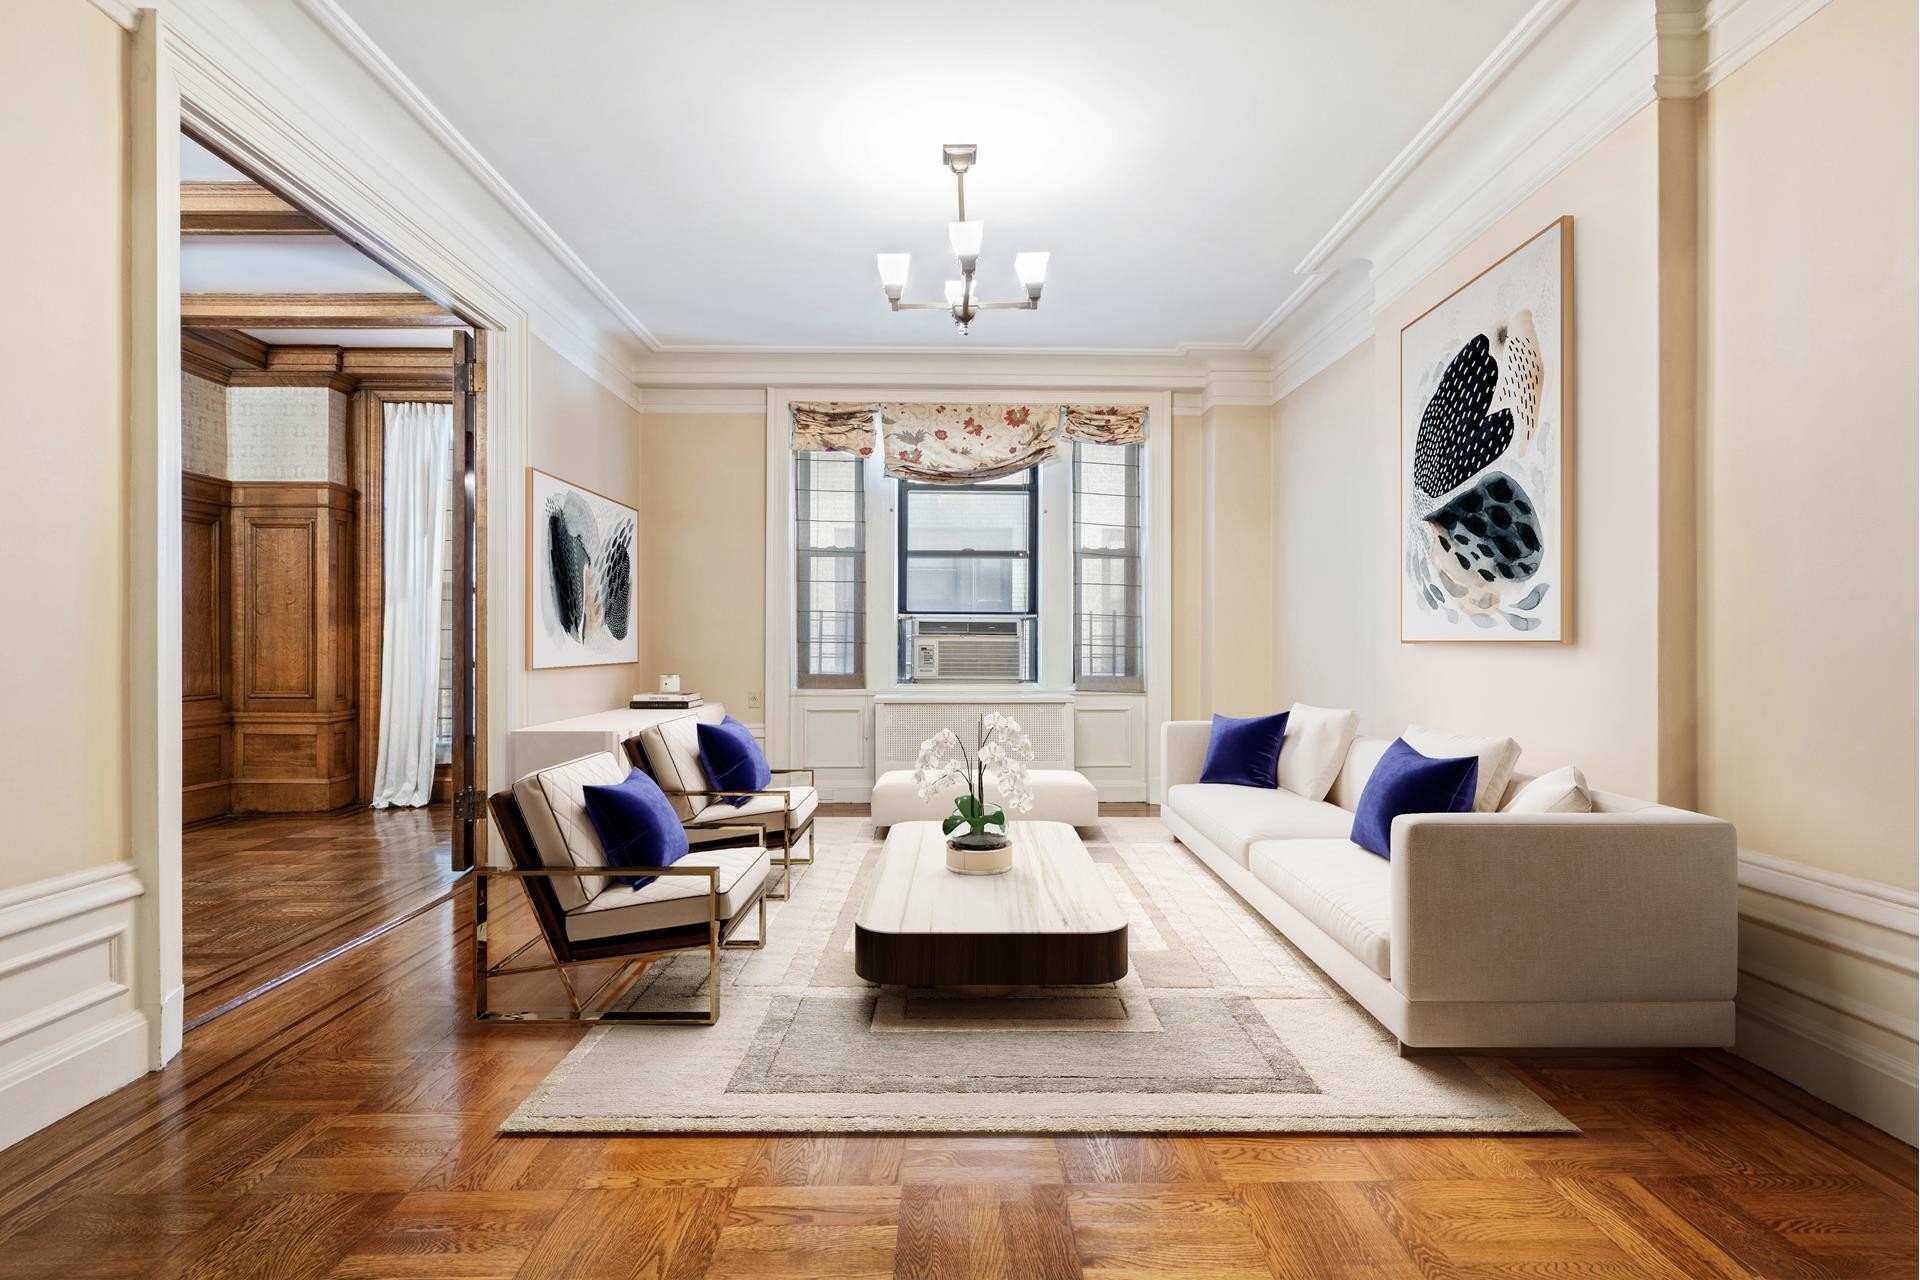 Co-op Properties for Sale at 645 W END AVE, 4C Upper West Side, New York, New York 10025